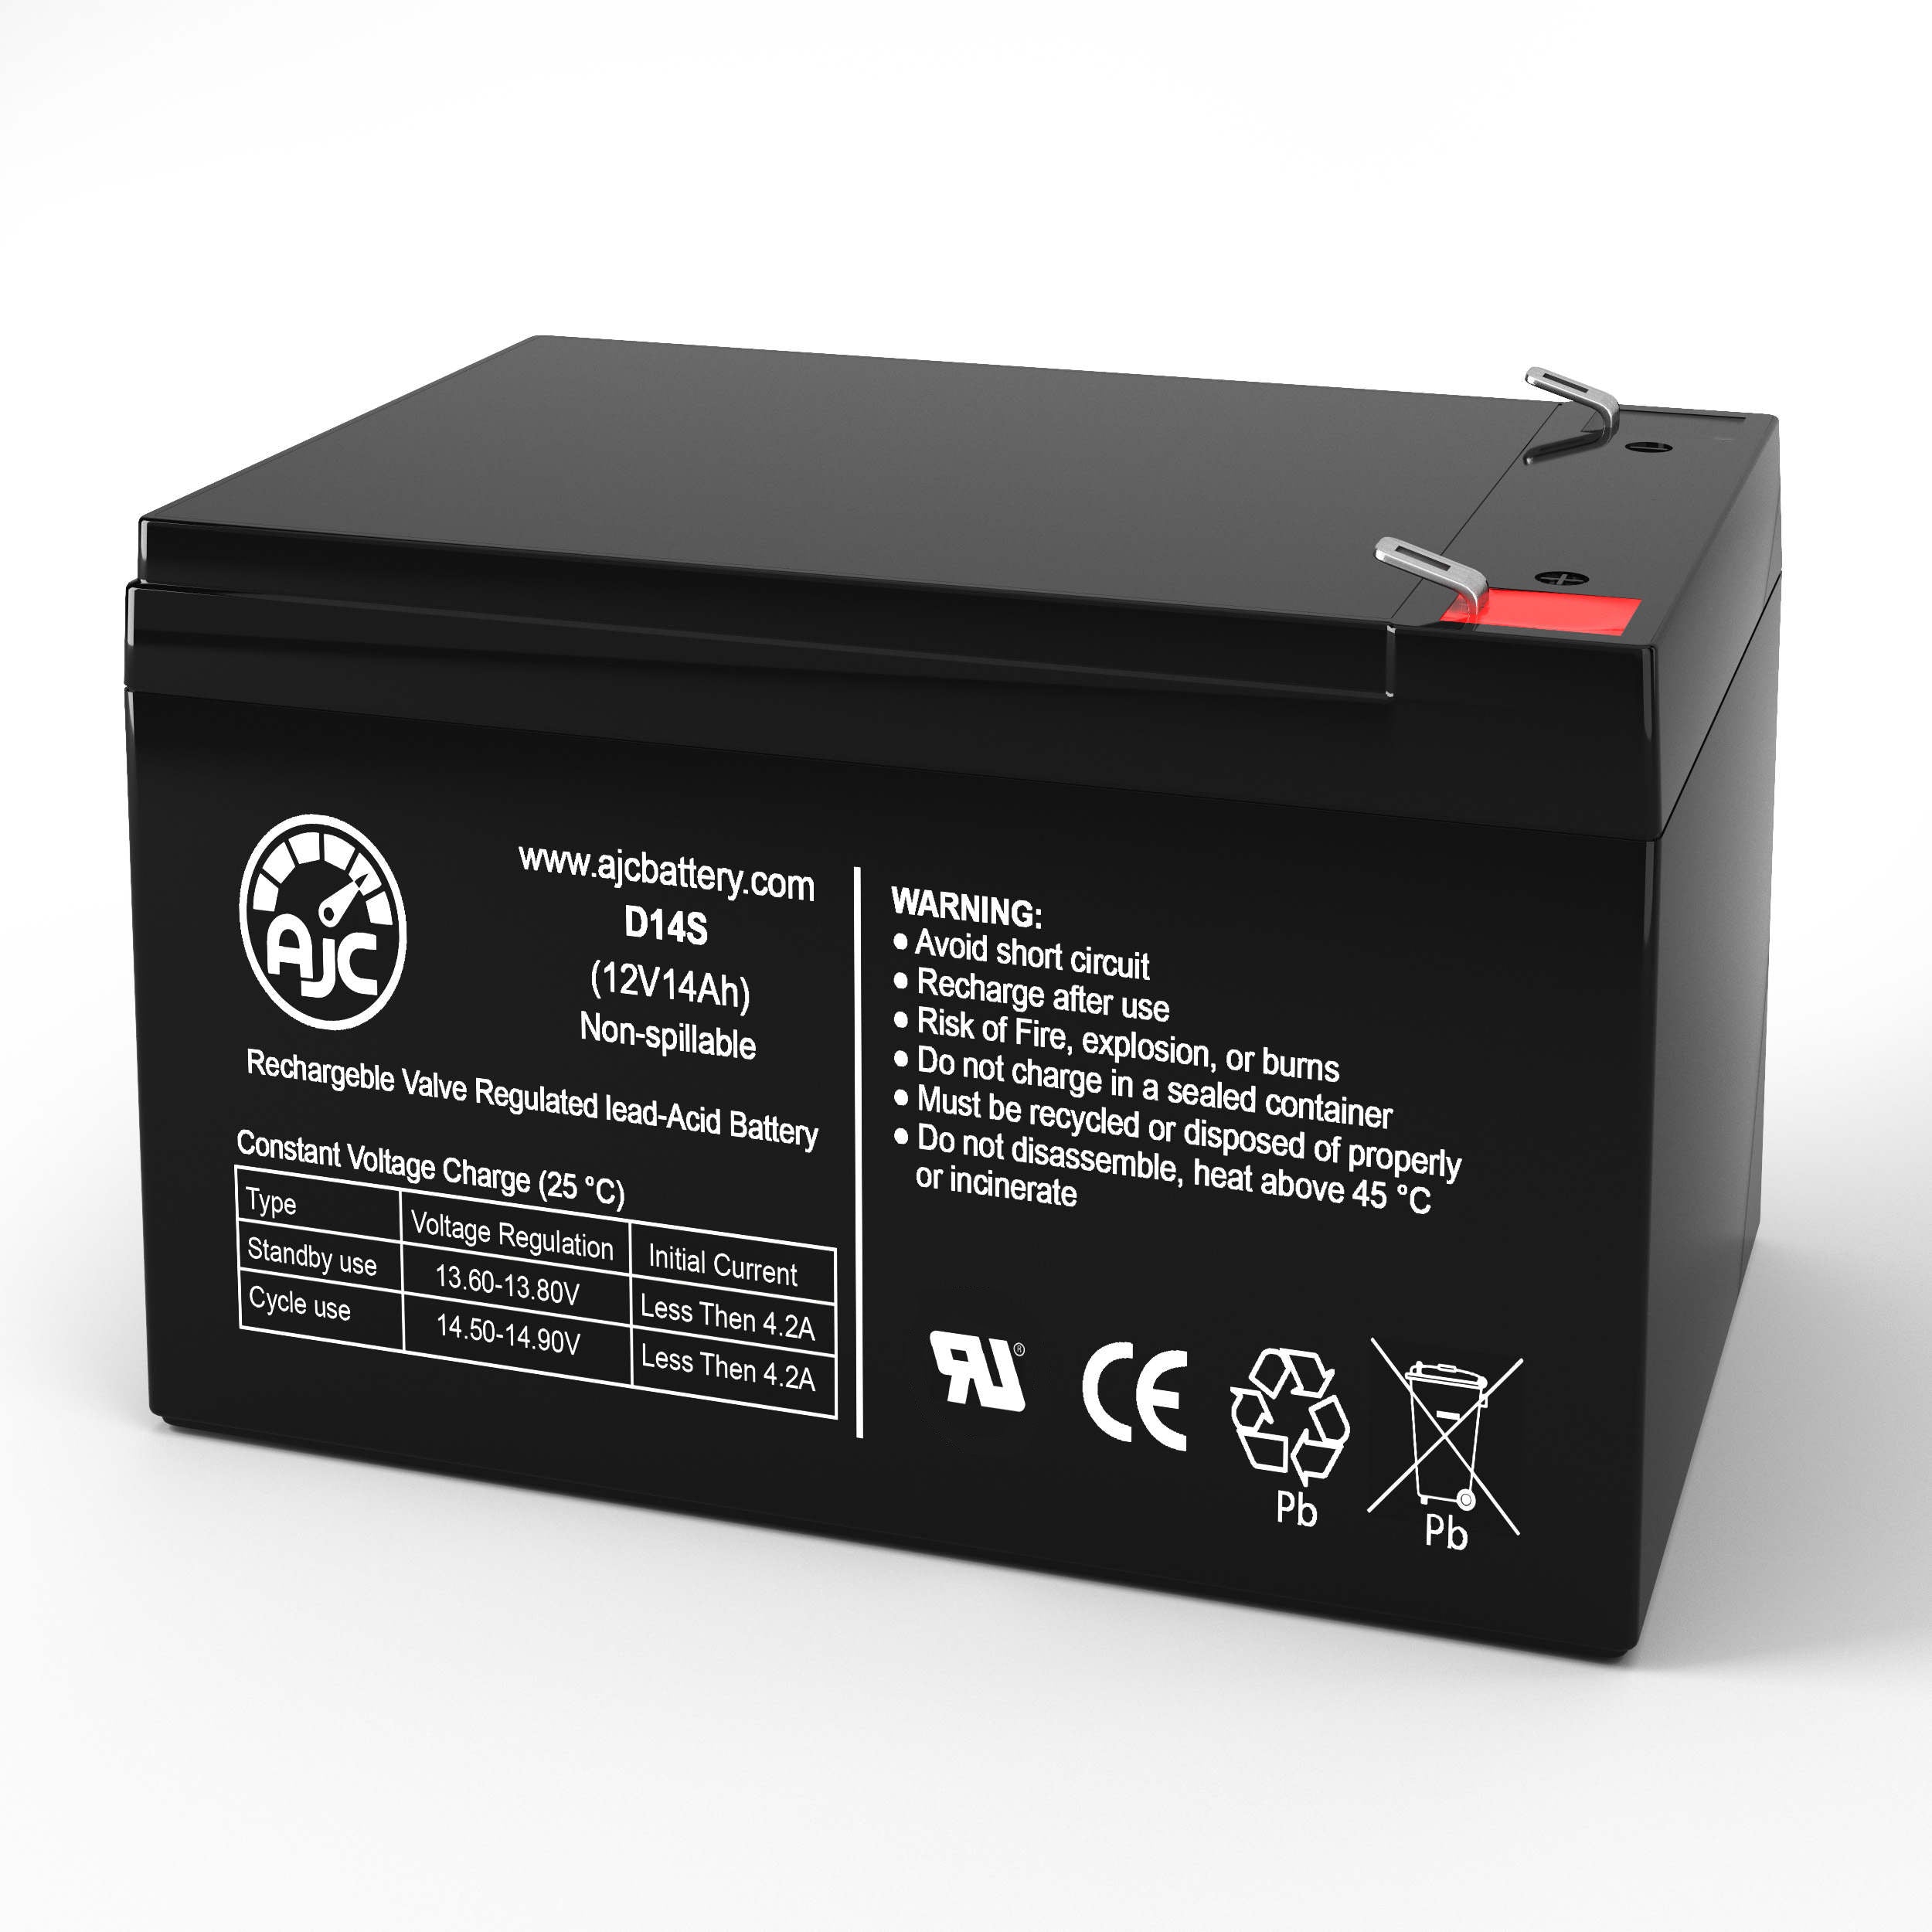 E-Scooter E Scooter 36V 350W 12V 14Ah Mobility Scooter Battery - This Is an AJC Brand Replacement - image 1 of 6